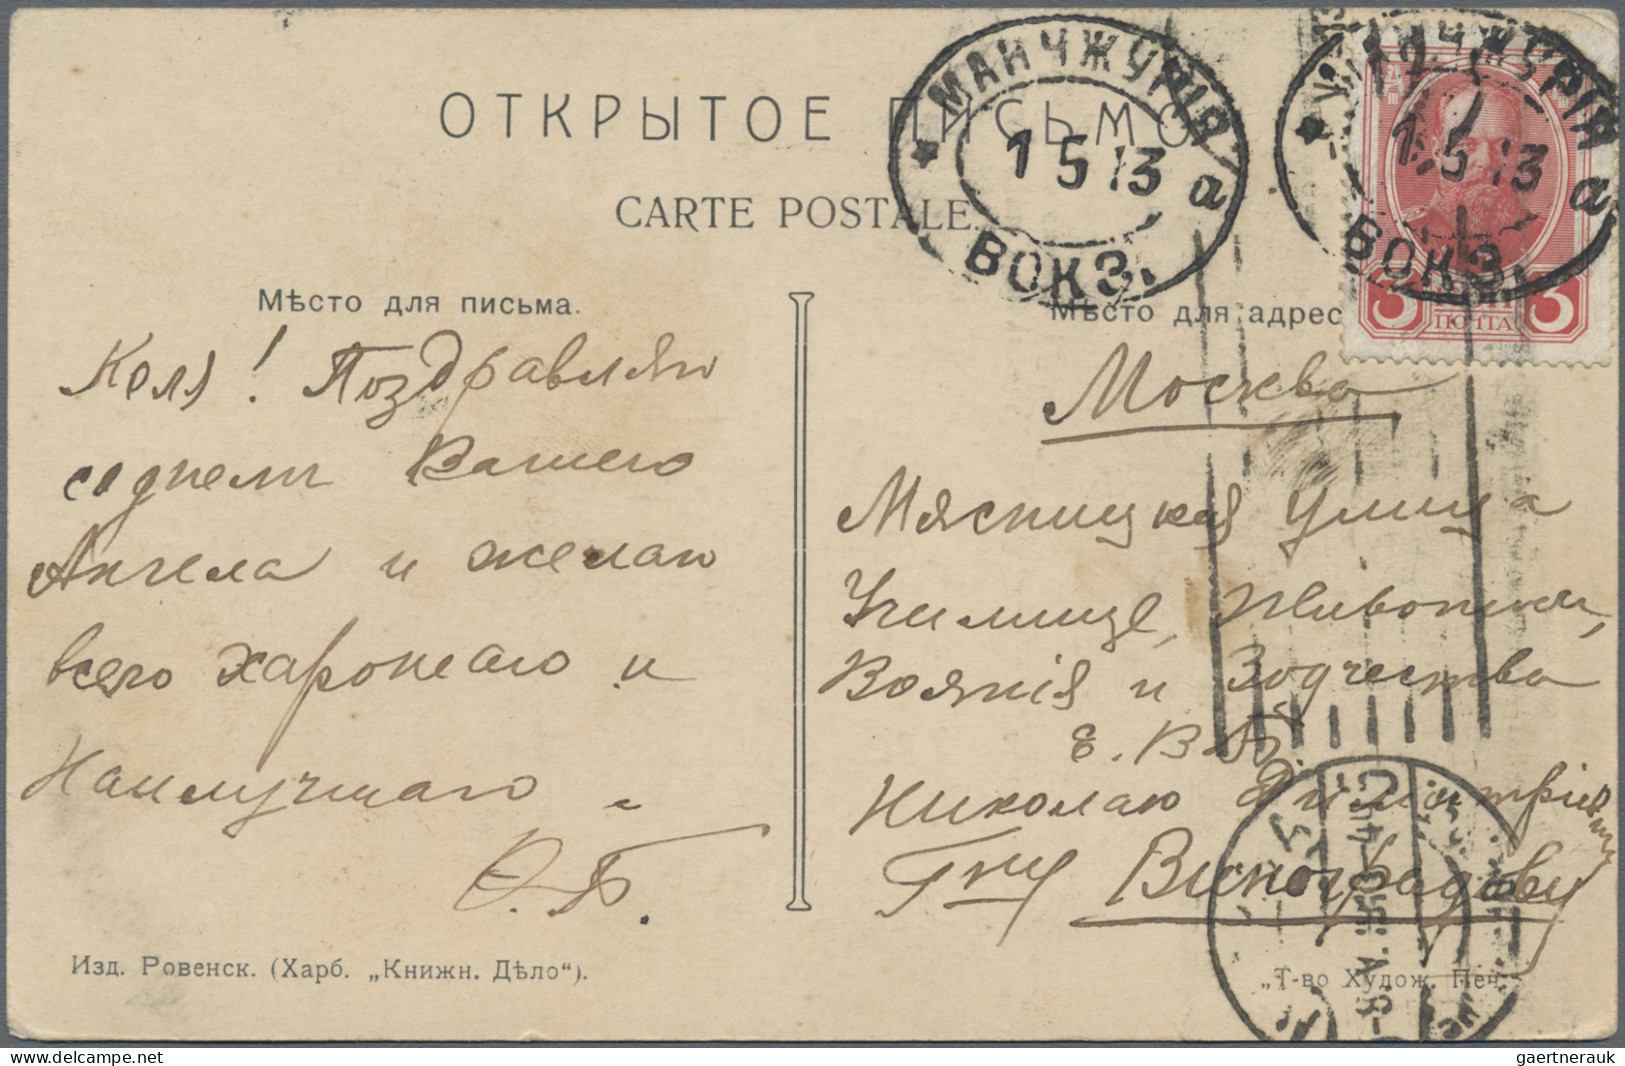 Russian Post in China: 1904/16, Manchuria, four ppc with postmarks: single circl